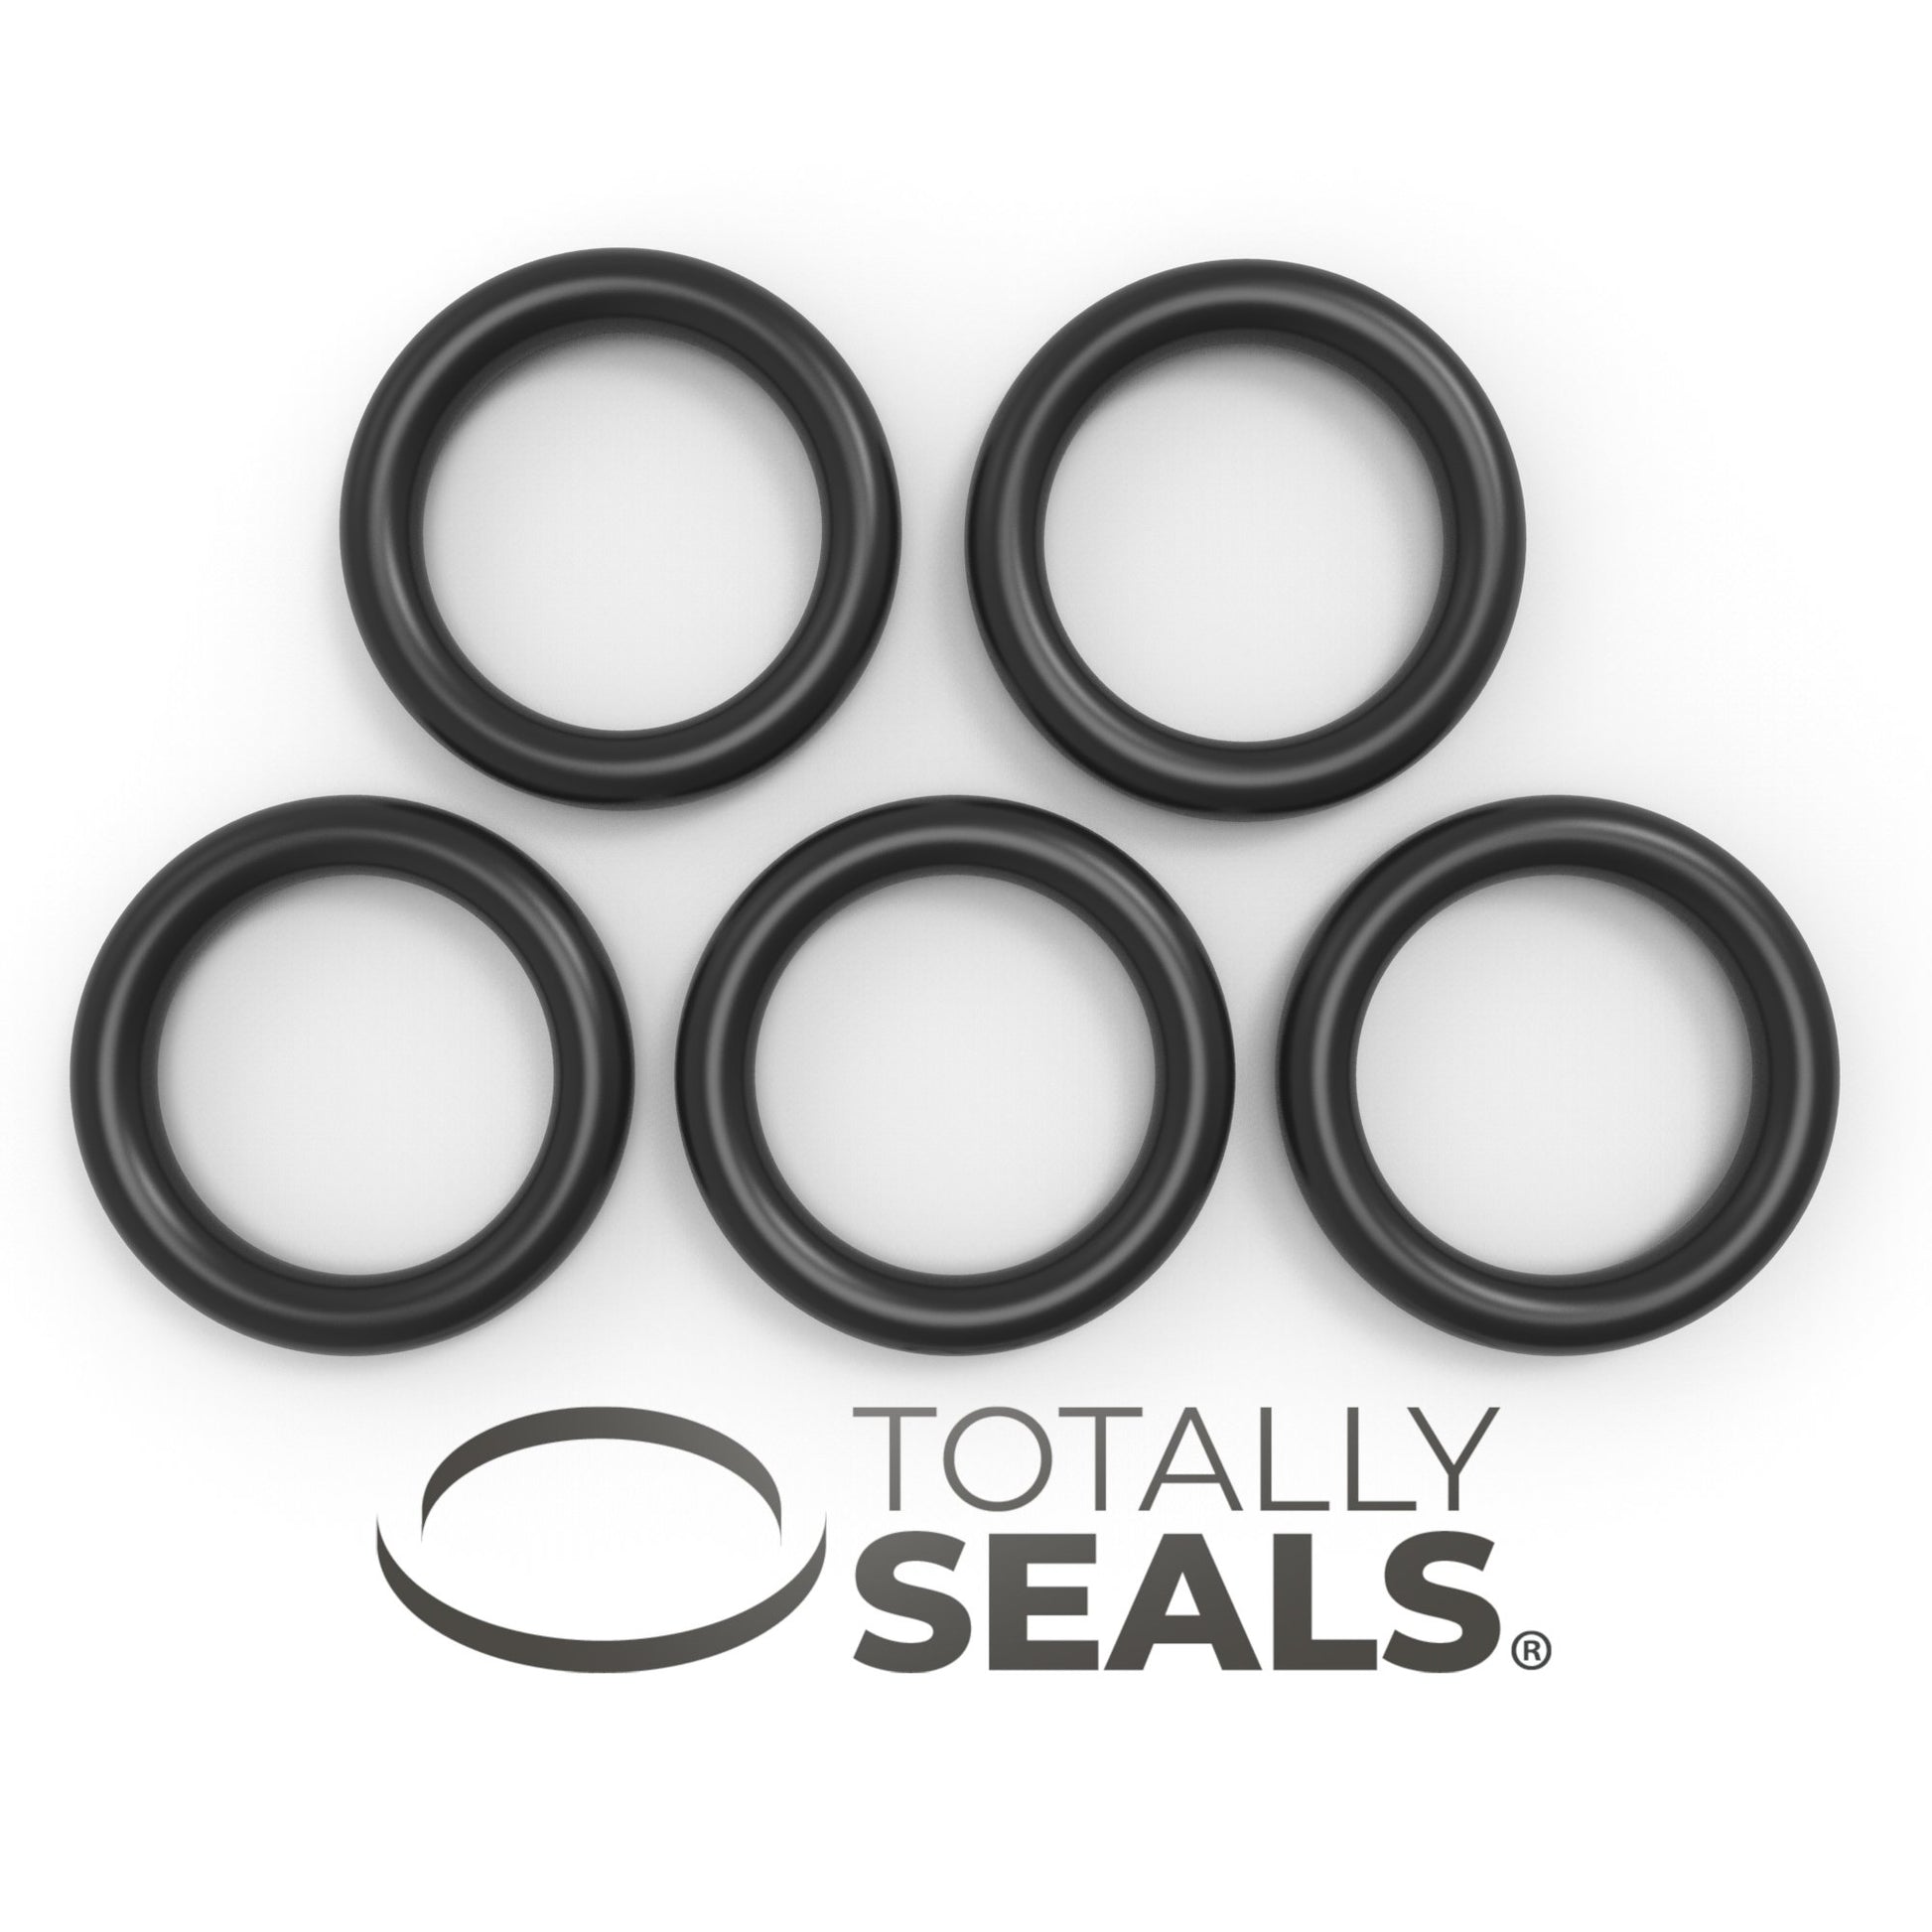 25mm x 3.5mm (32mm OD) Nitrile O-Rings - Totally Seals®